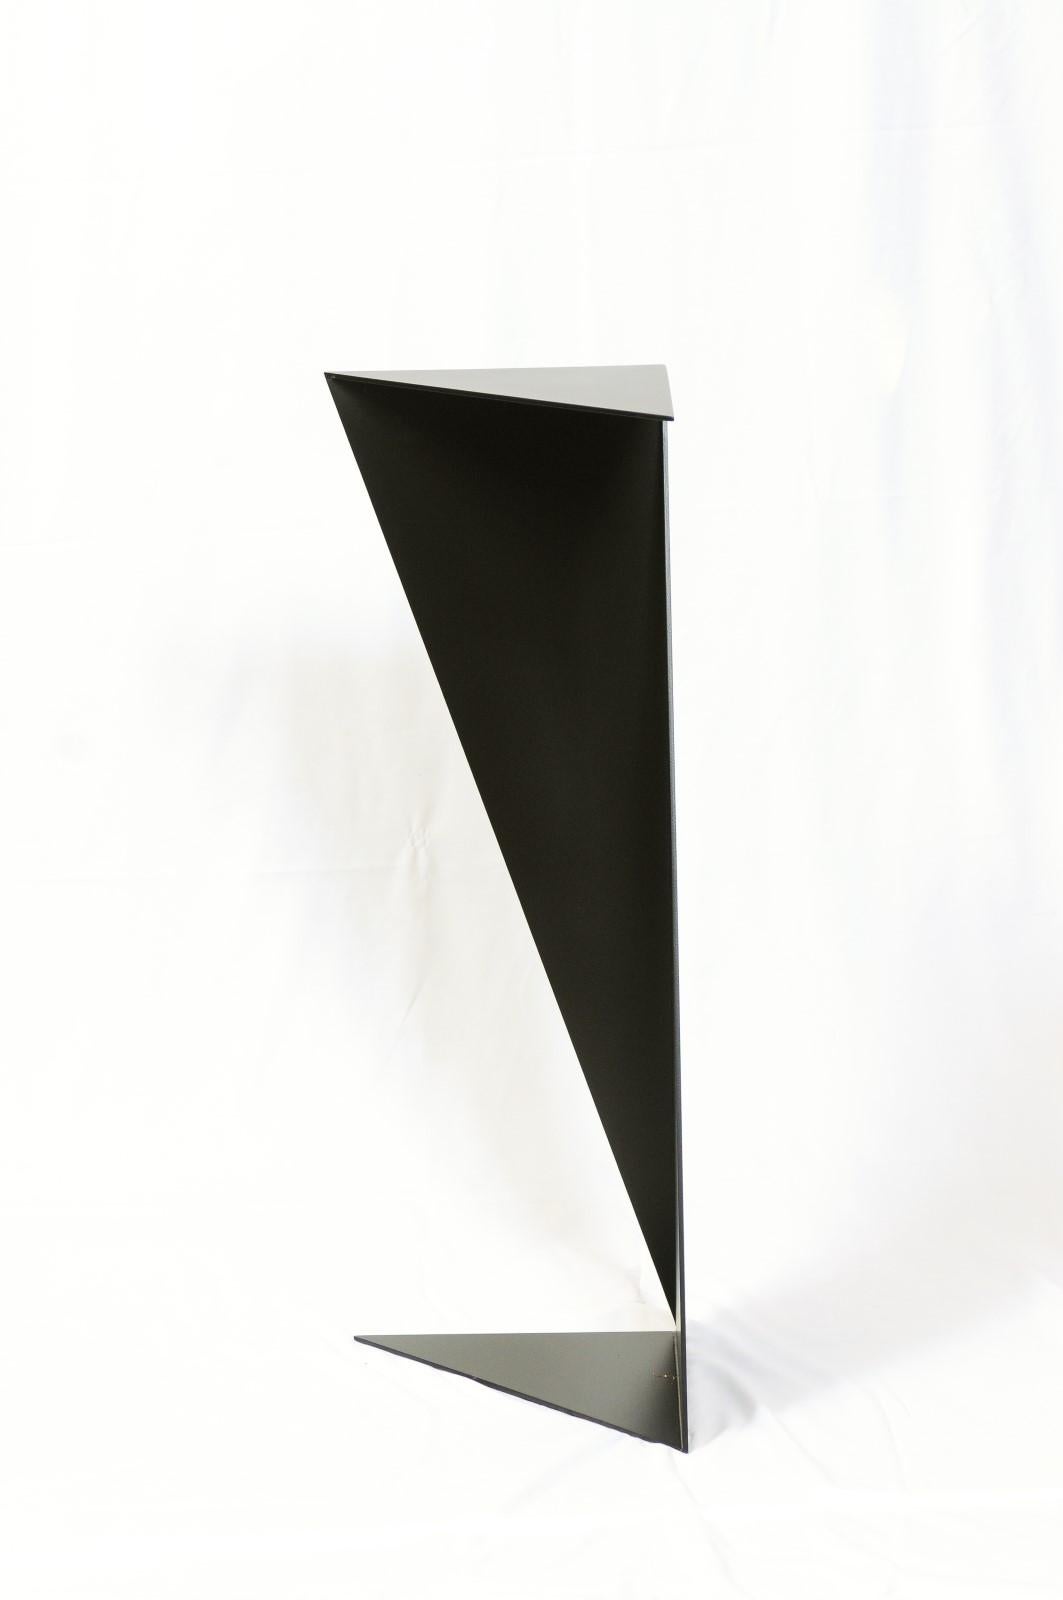 Origami Style Steel Pedestal Stand, Black Finish 1